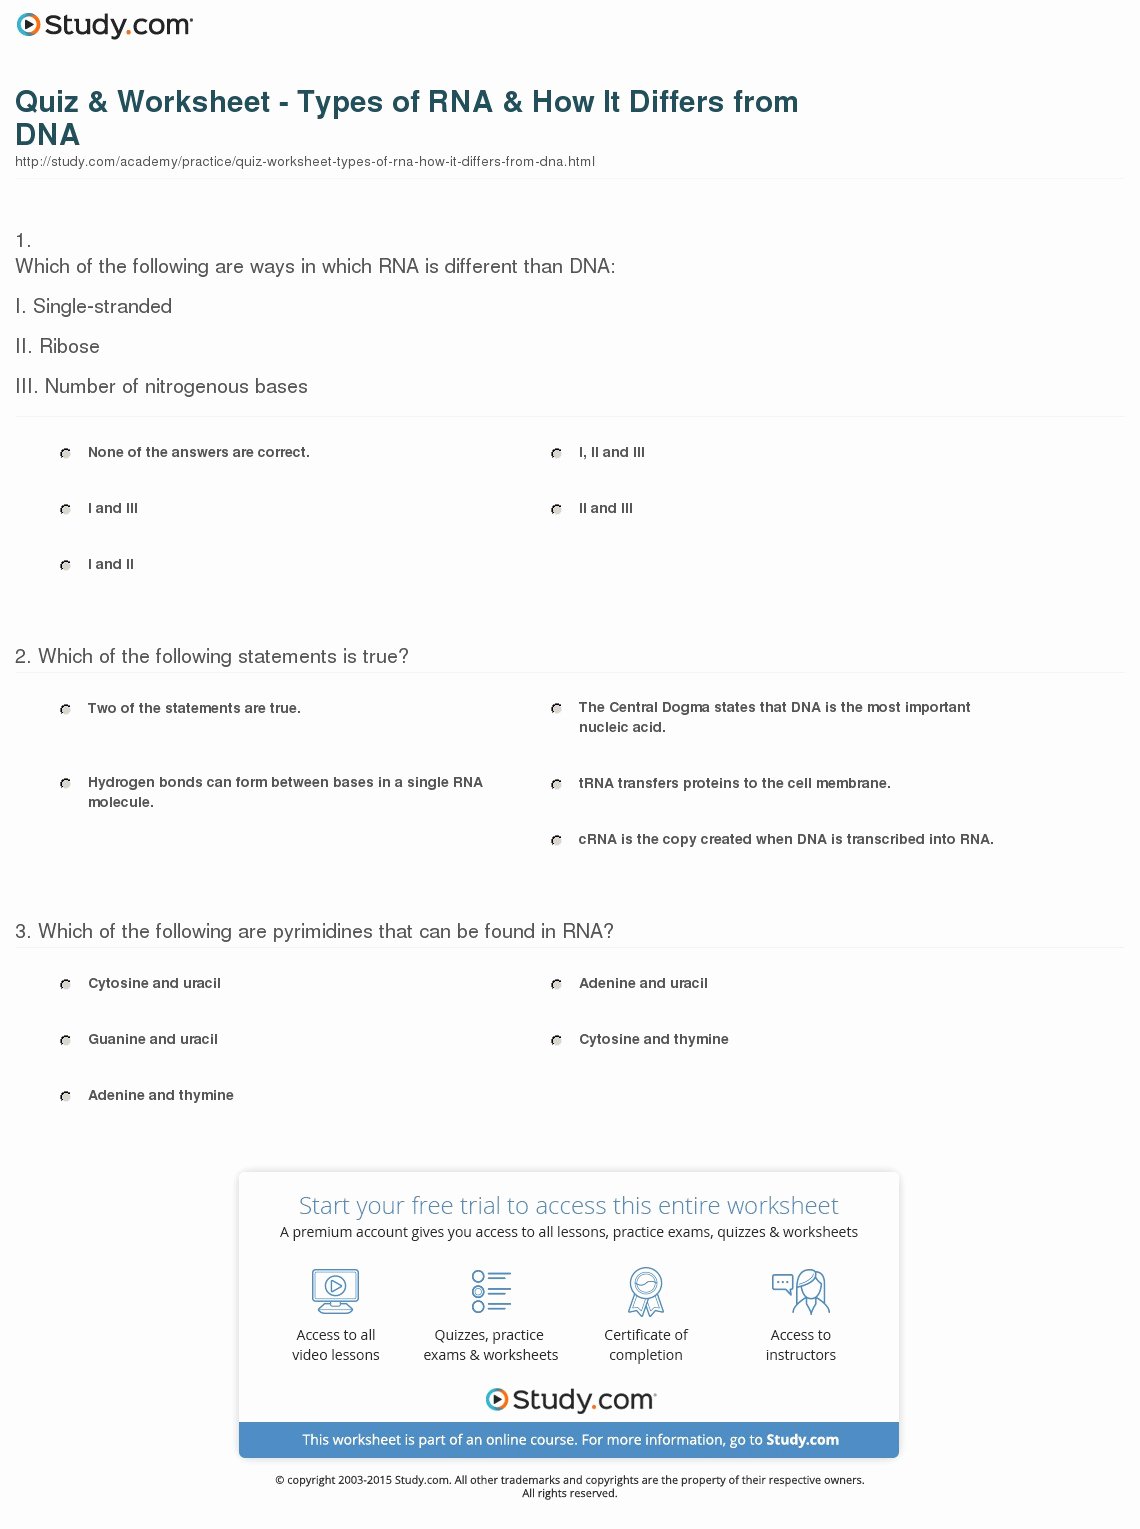 Dna and Rna Worksheet Answers New Quiz &amp; Worksheet Types Of Rna &amp; How It Differs From Dna